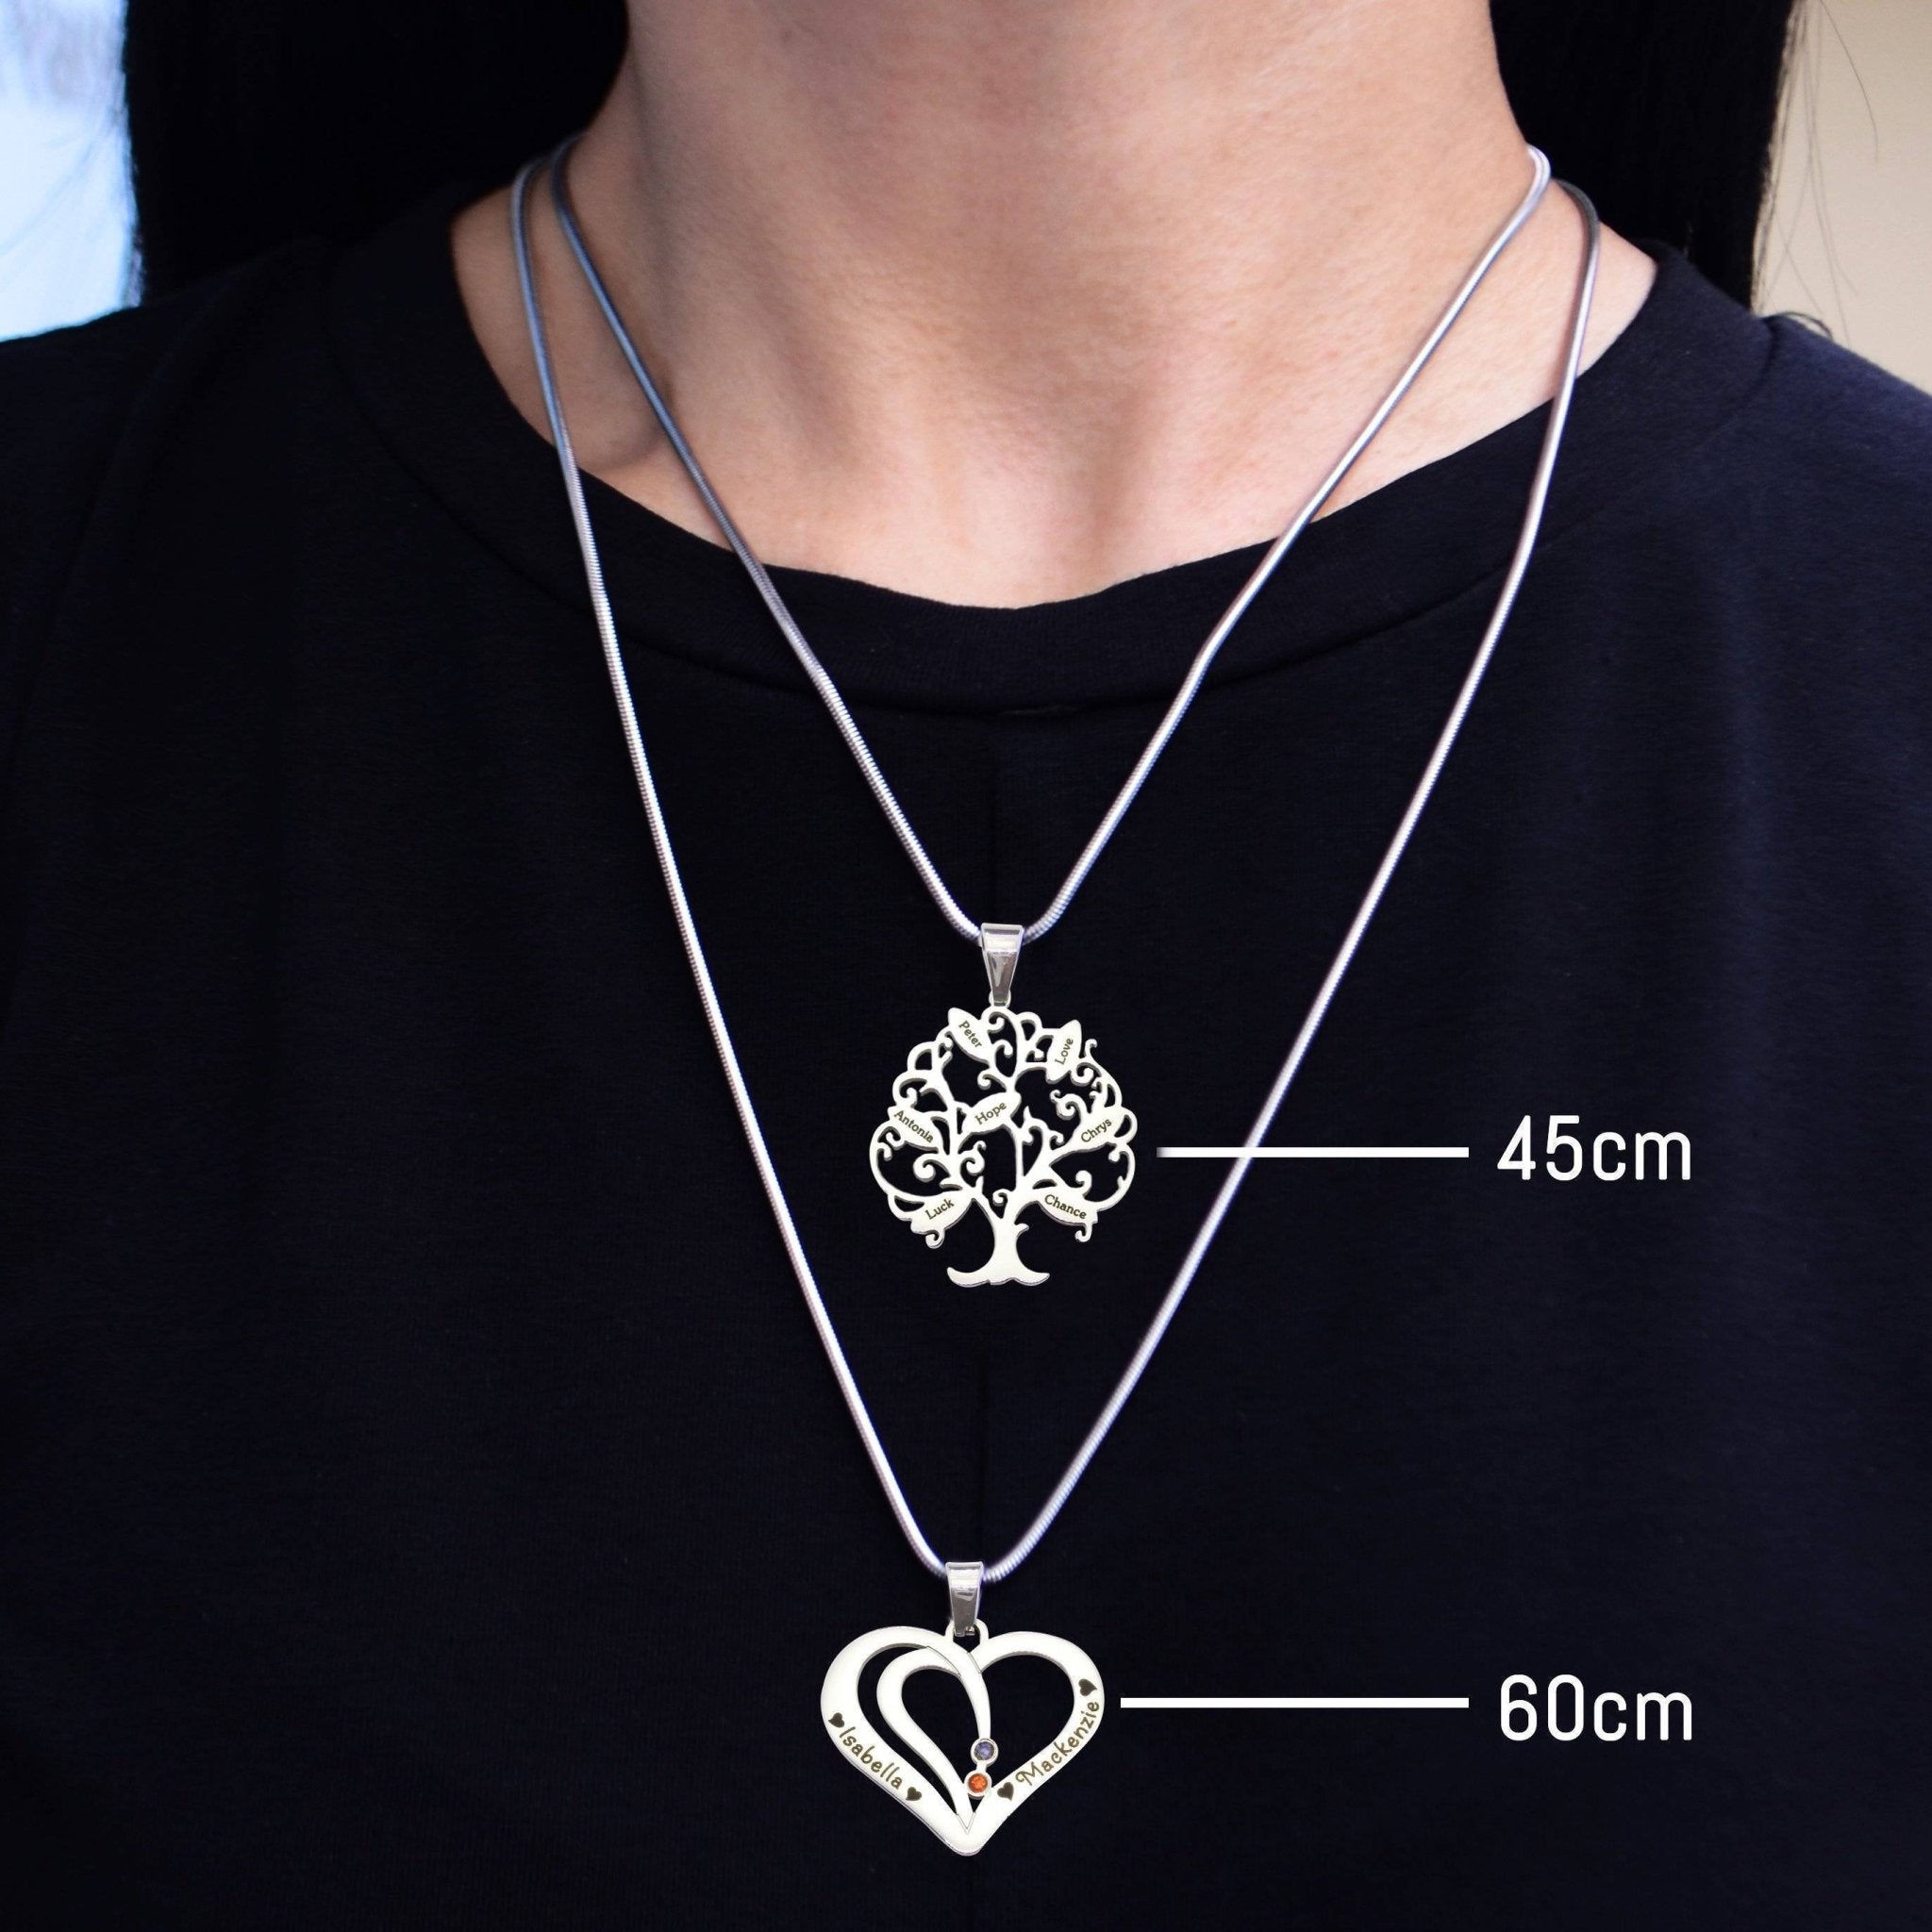 Hearts of Love Necklace - Mothers Jewellery by Belle Fever